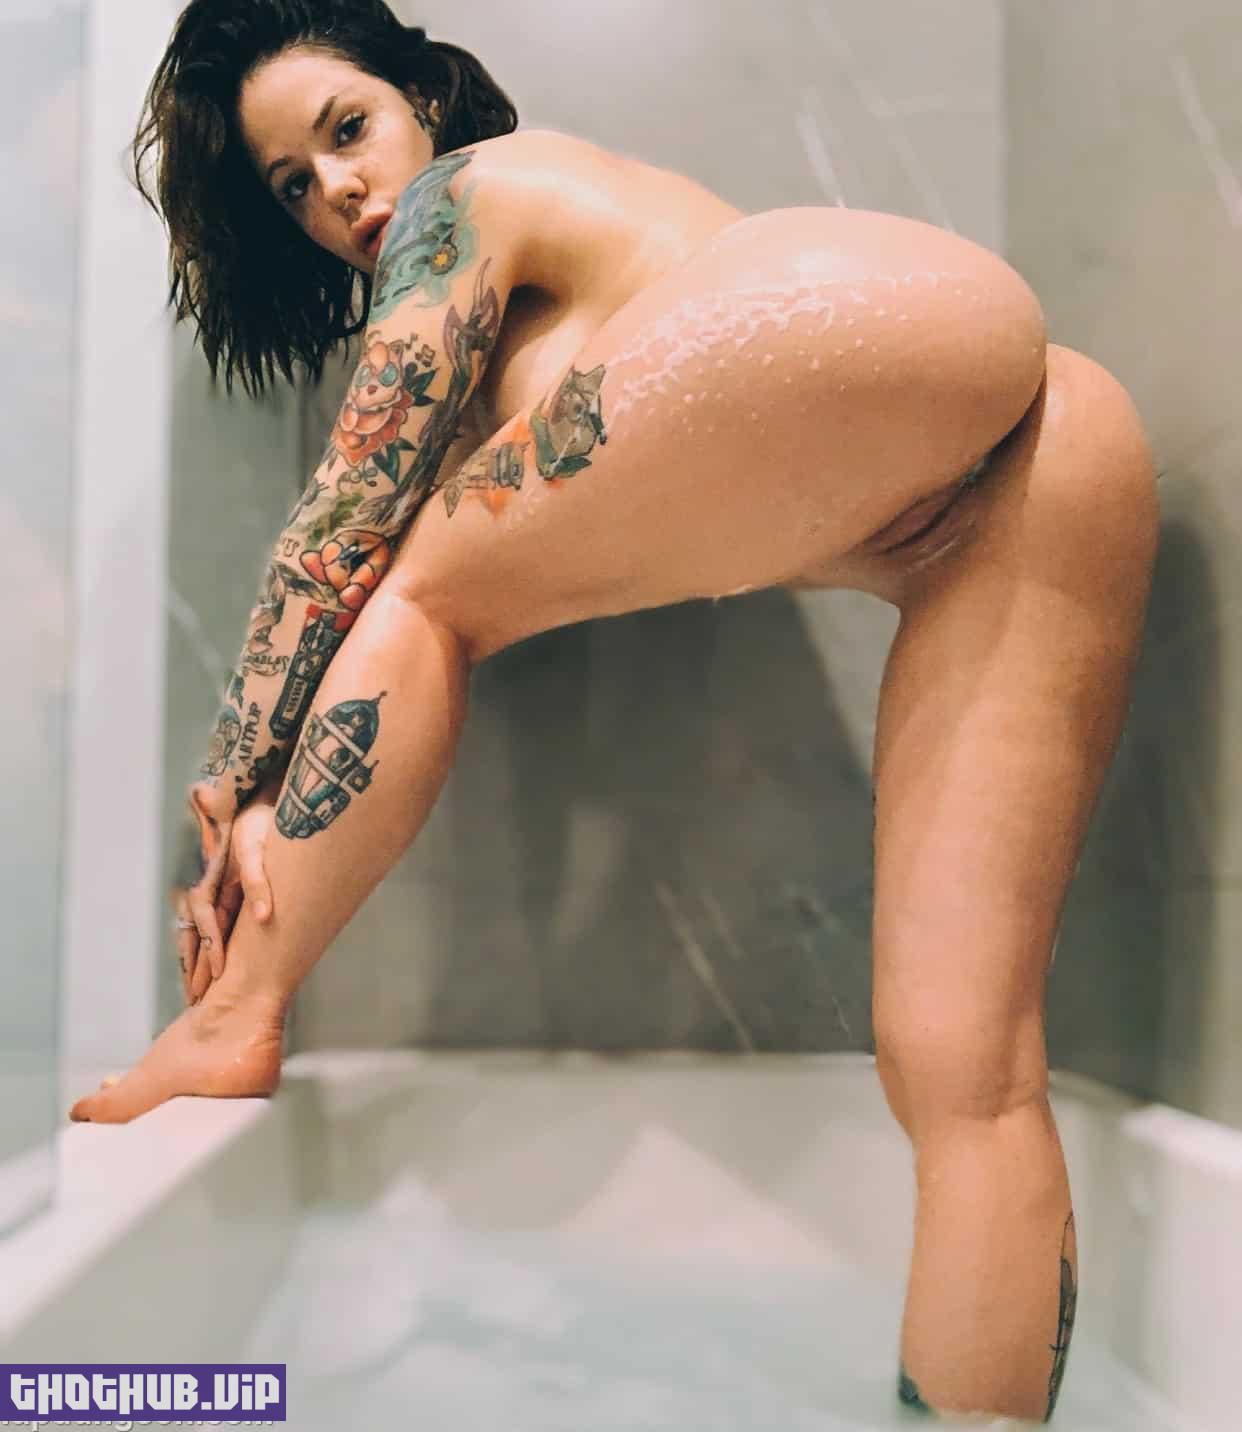 1661031971 777 Laika %E2%80%93 Tatted Busty Hottie Onlyfans Nudes